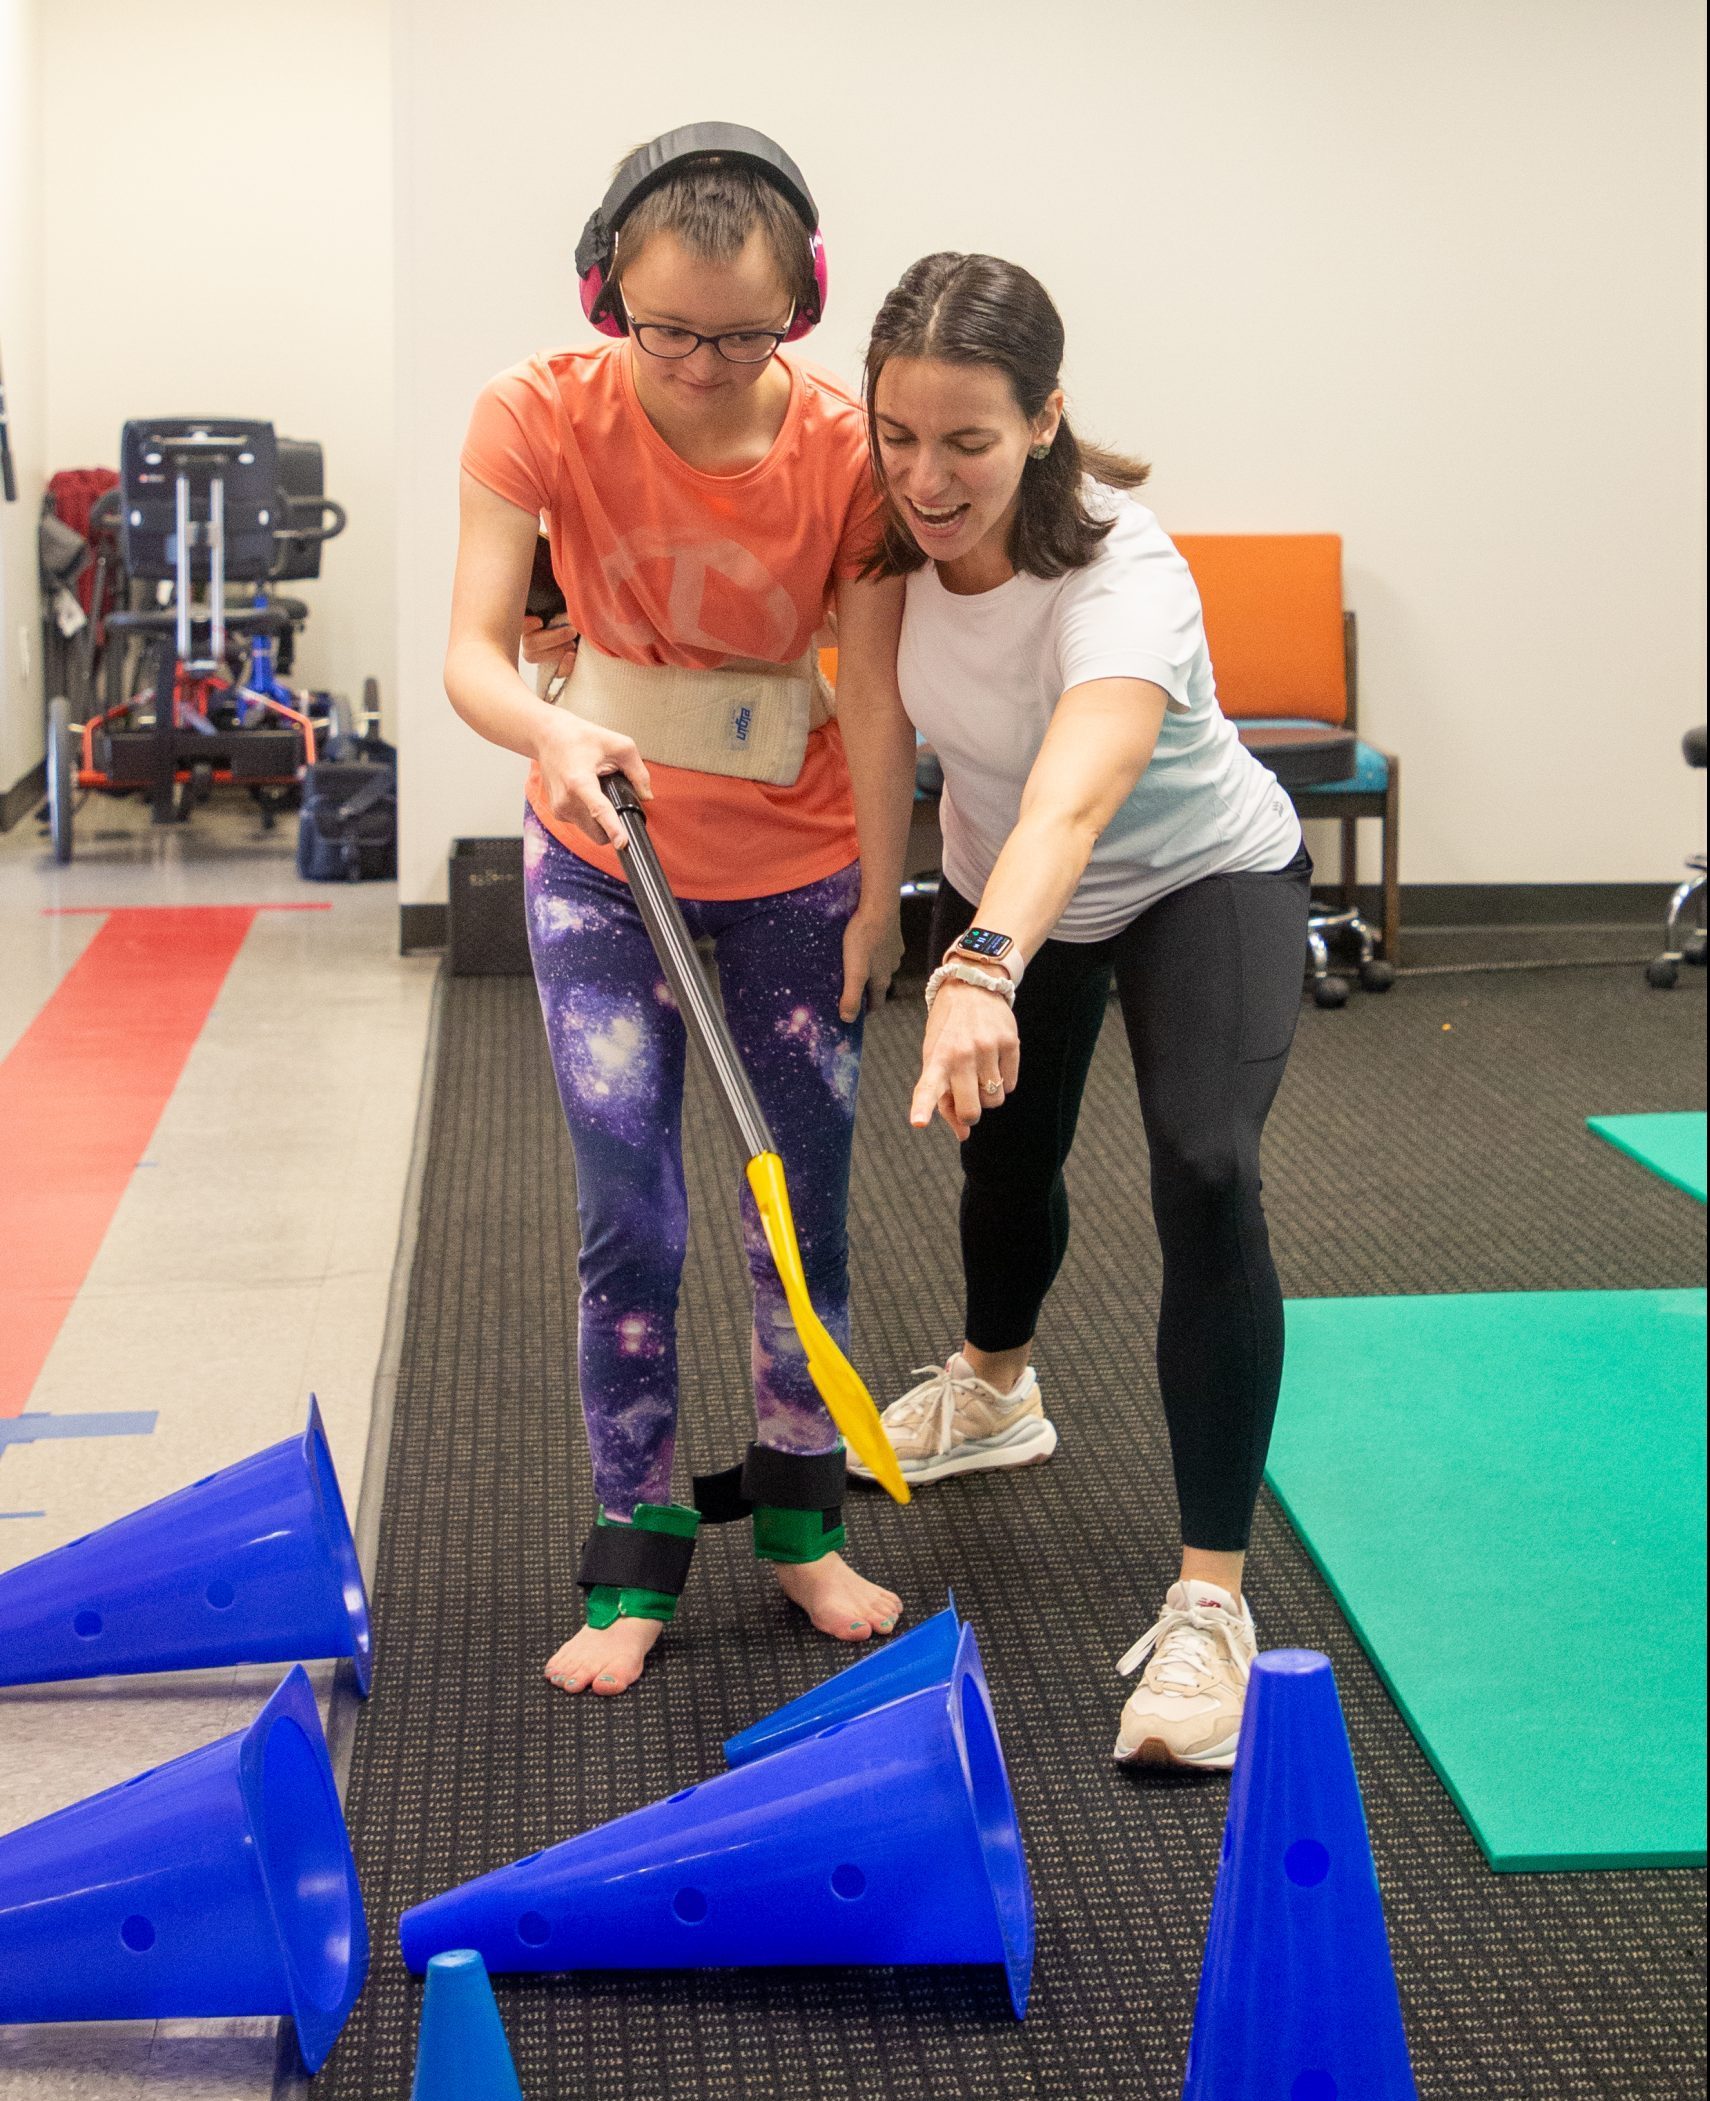 Pediatric therapists helps a young child with down syndrome at Pediatric Therapy Center in Houston